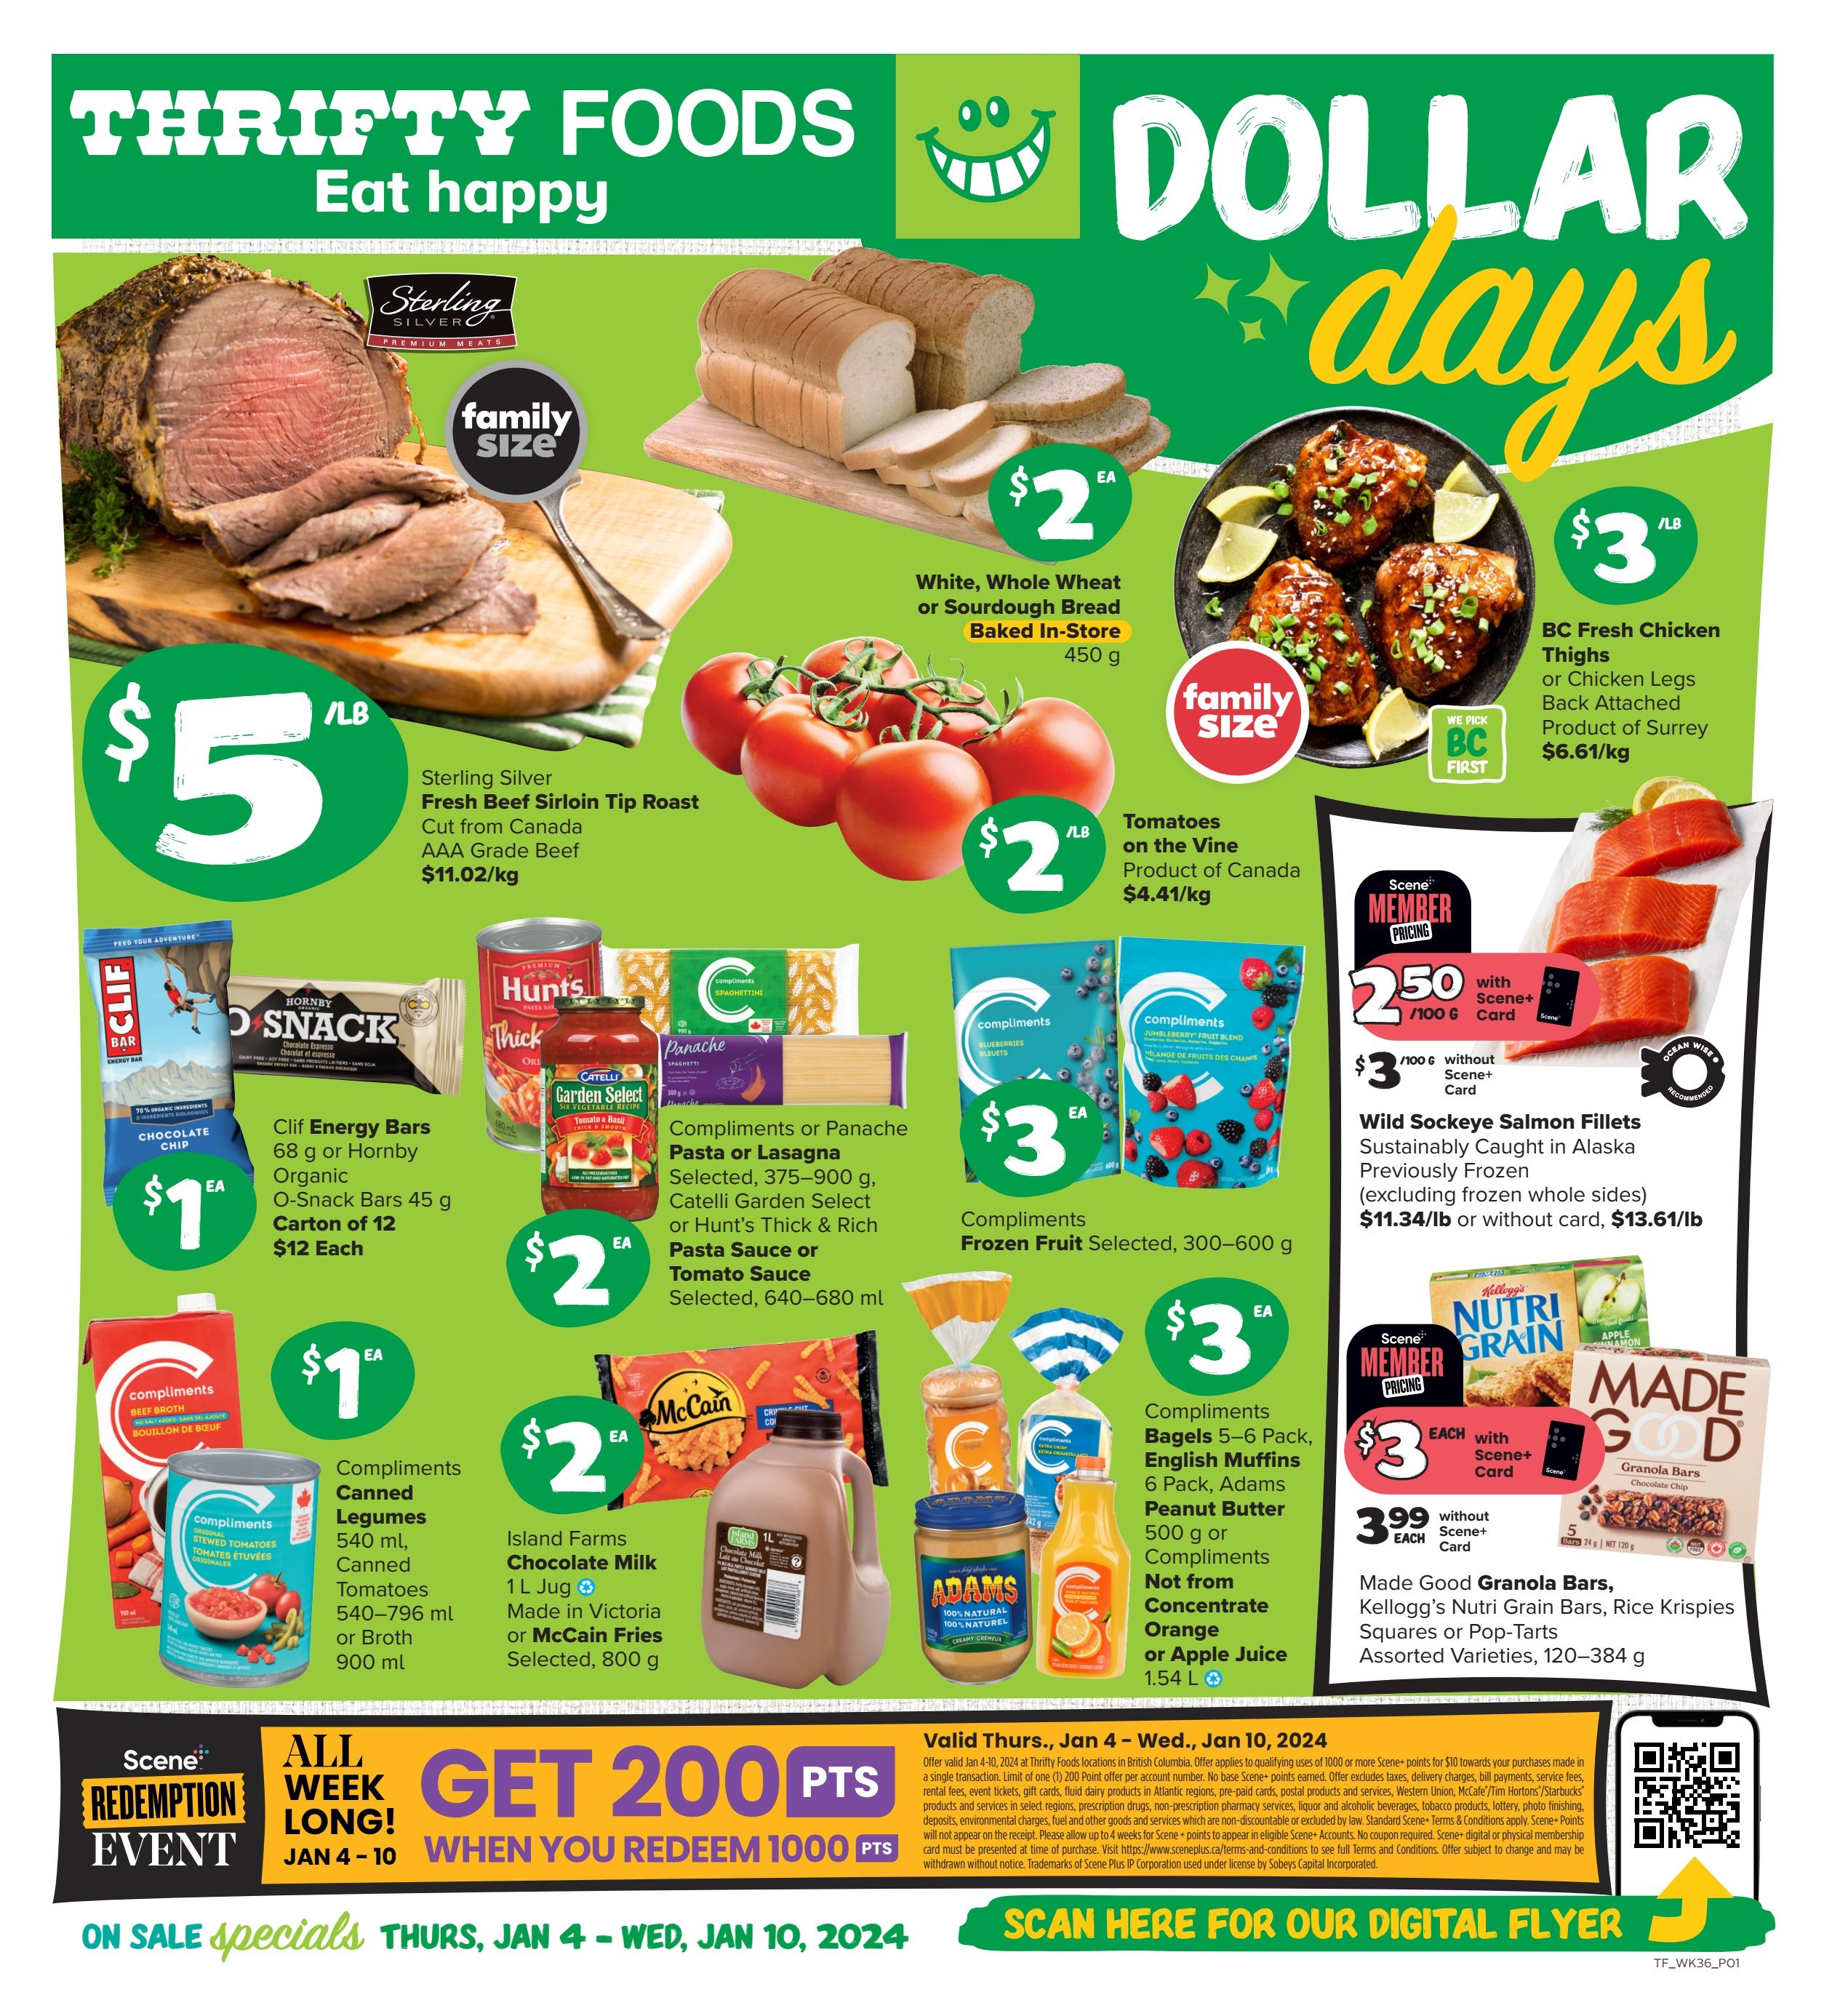 Thrifty food discounts